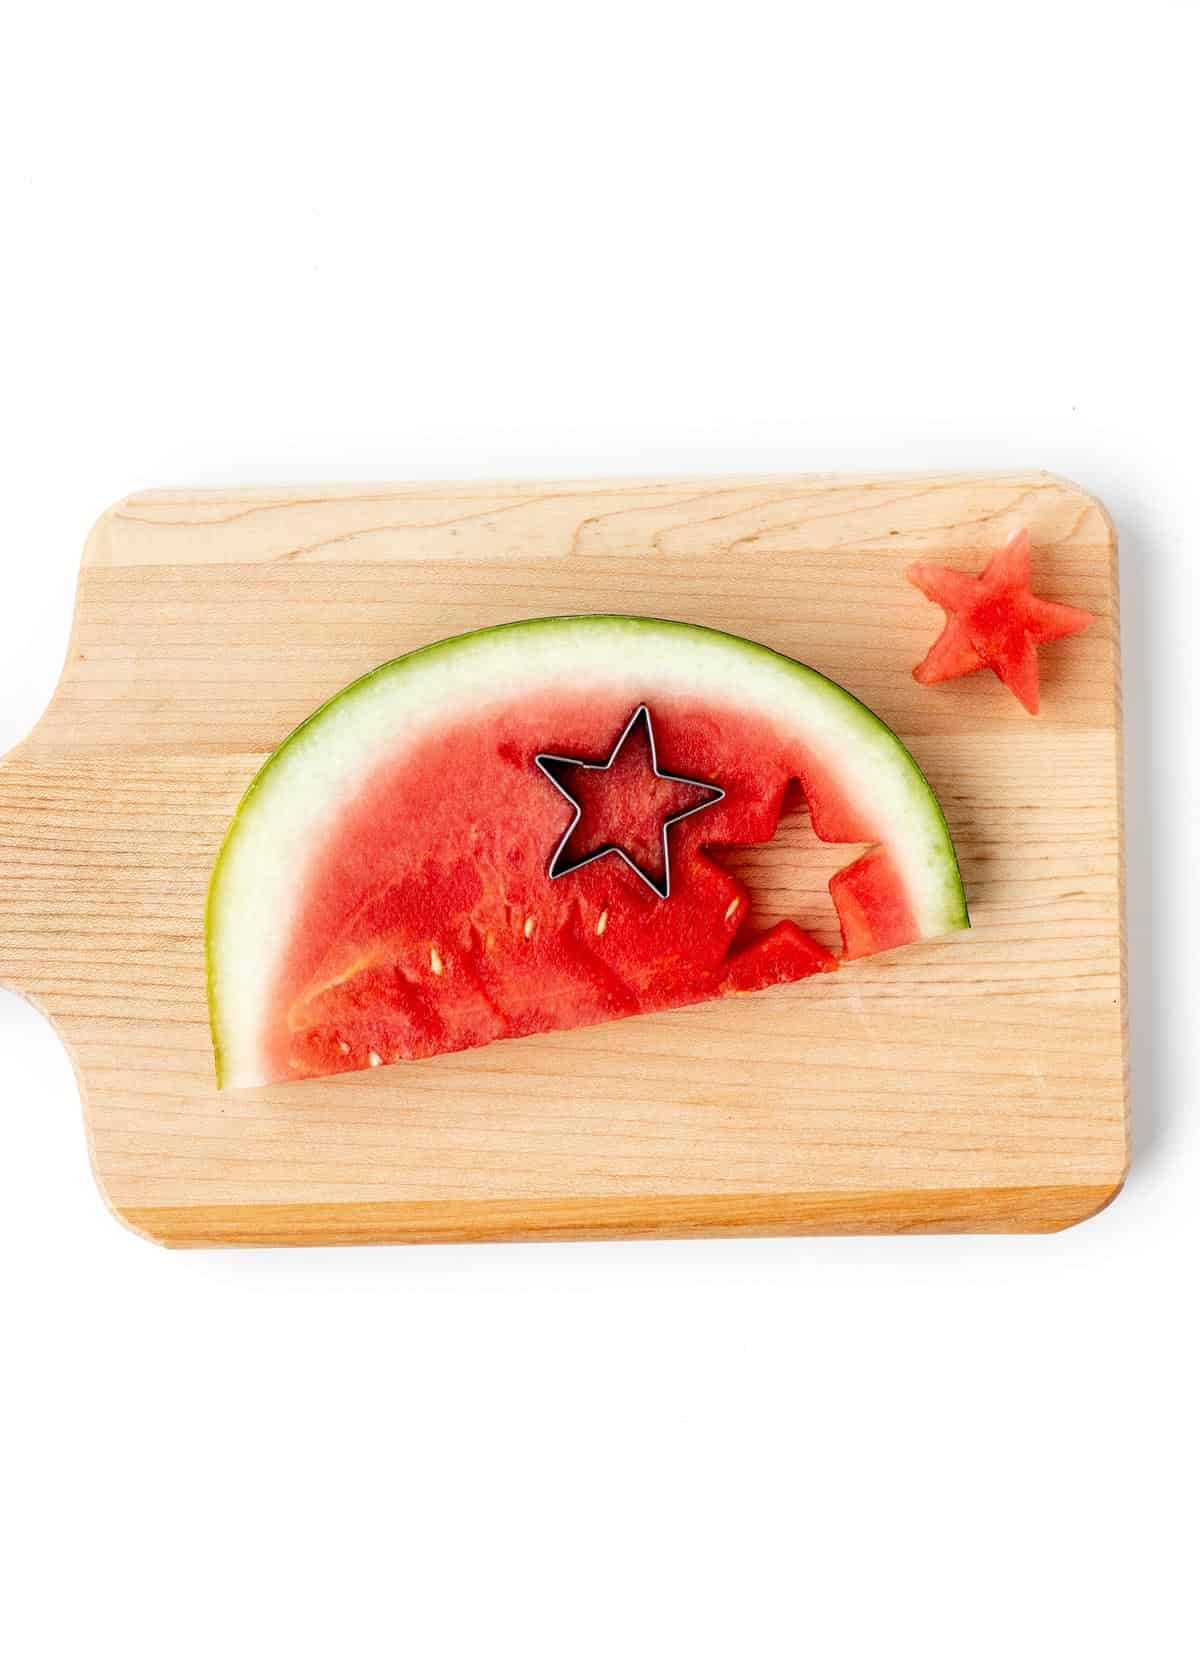 A star cookie cutter making star shapes out of a watermelon slice on a wooden cutting board.